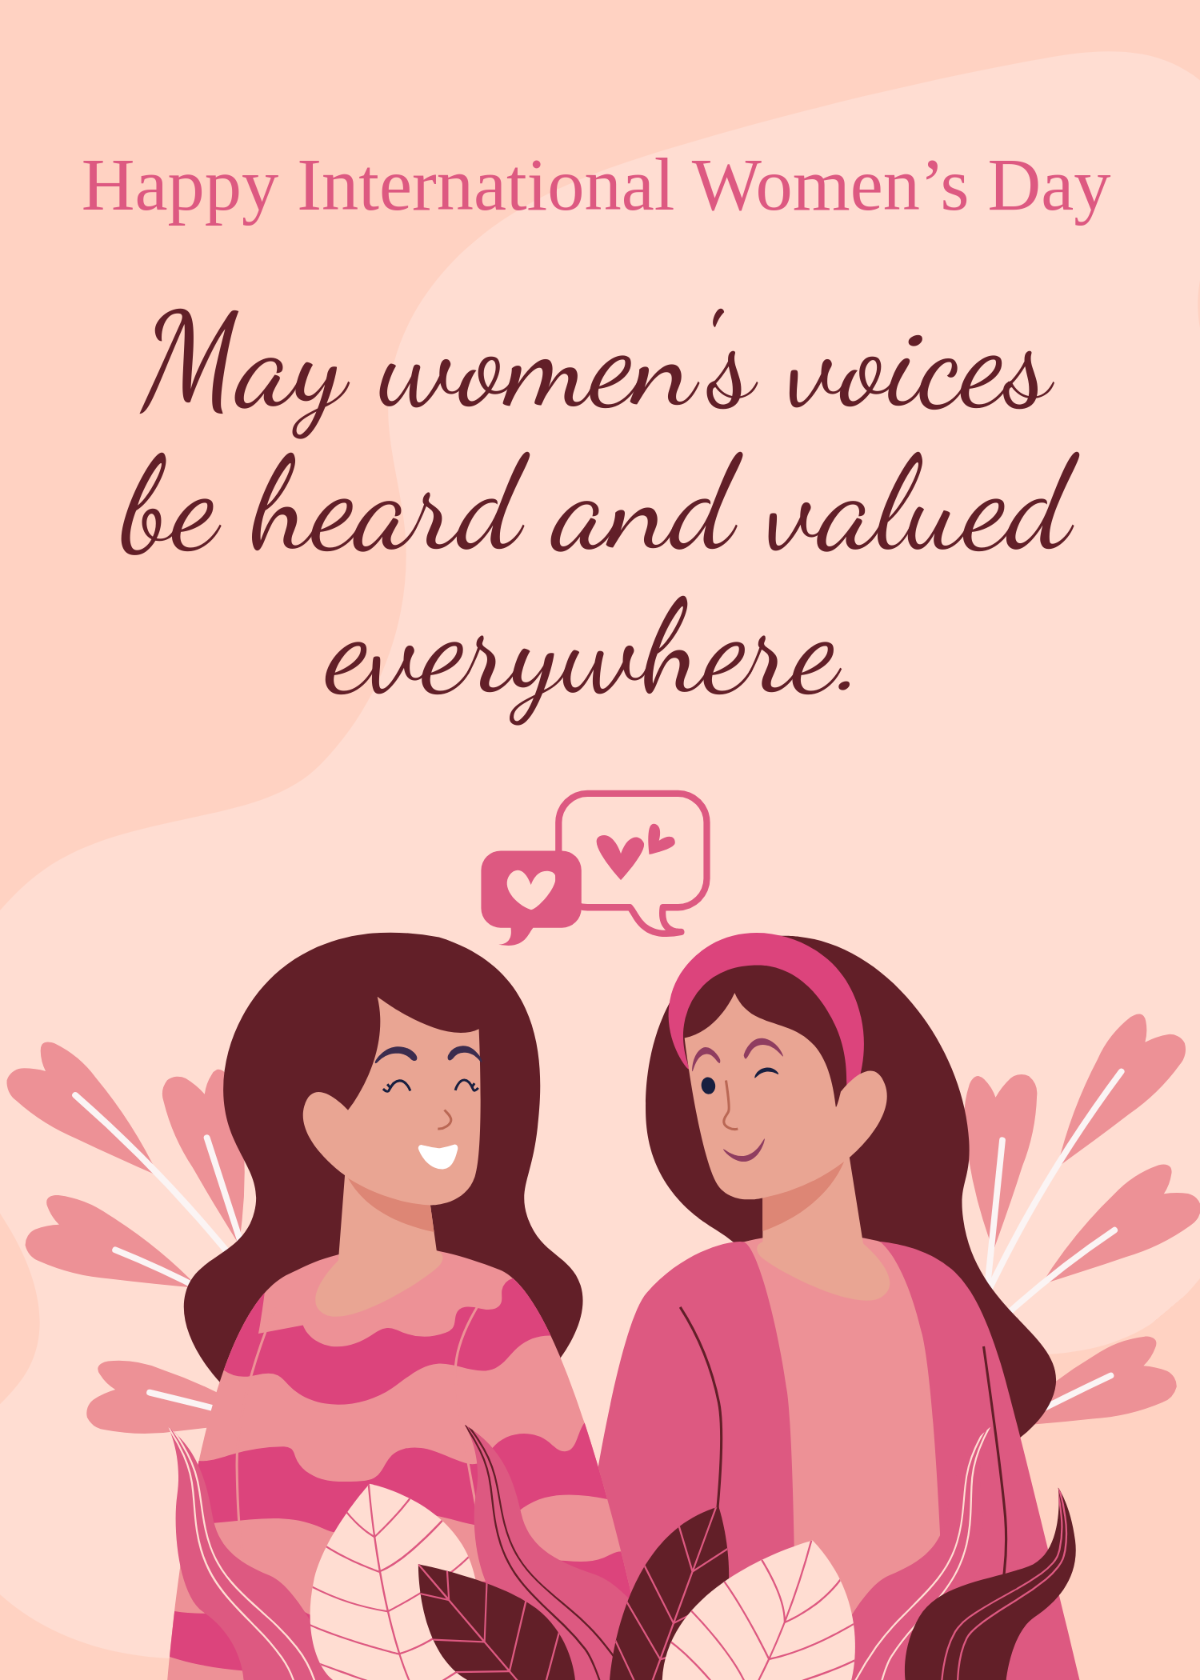 International Women's Day Wishes Template